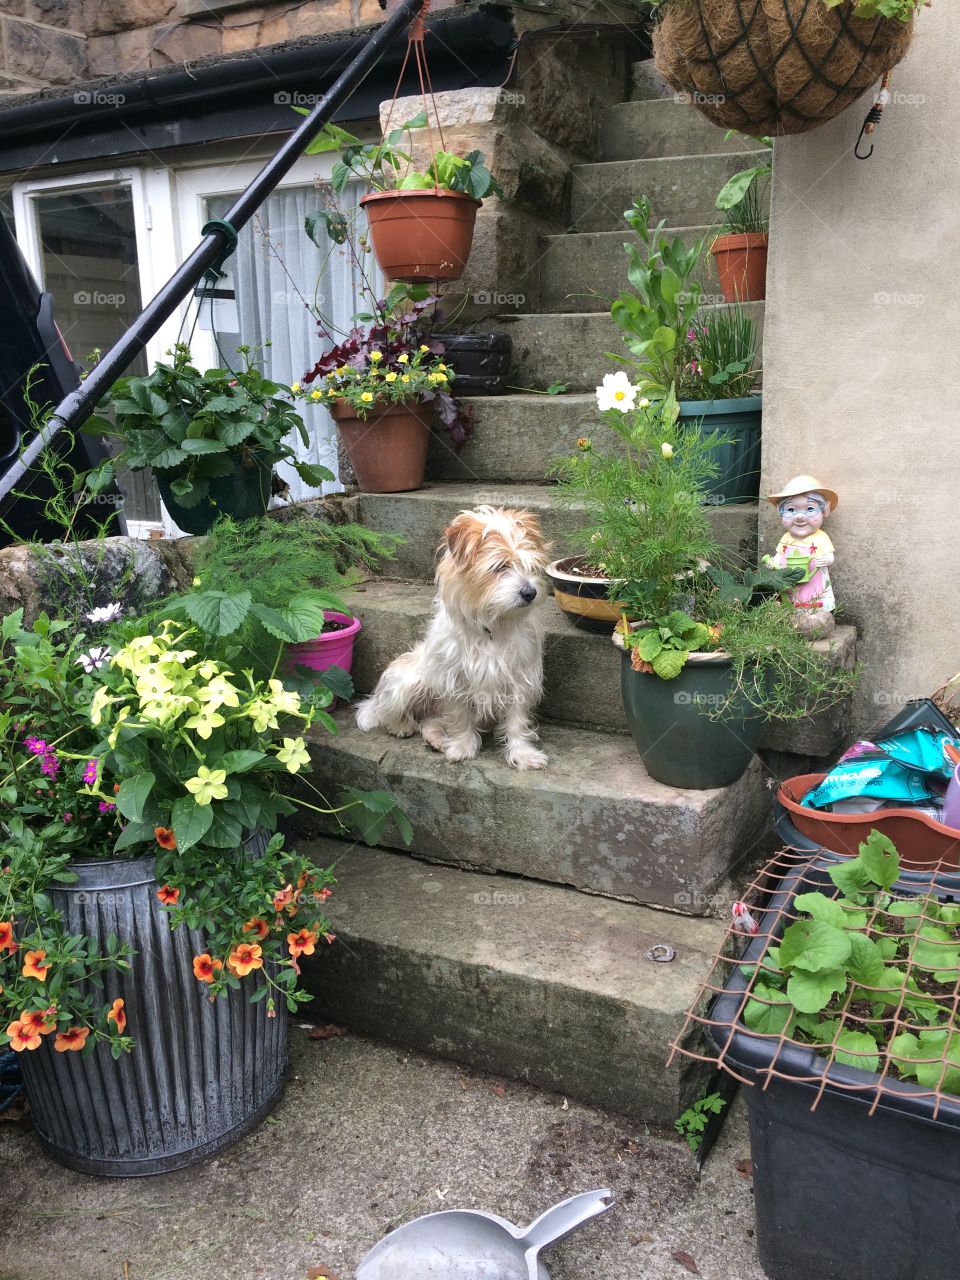 Dog sitting on outdoor stone steps surrounded by plants and flowers